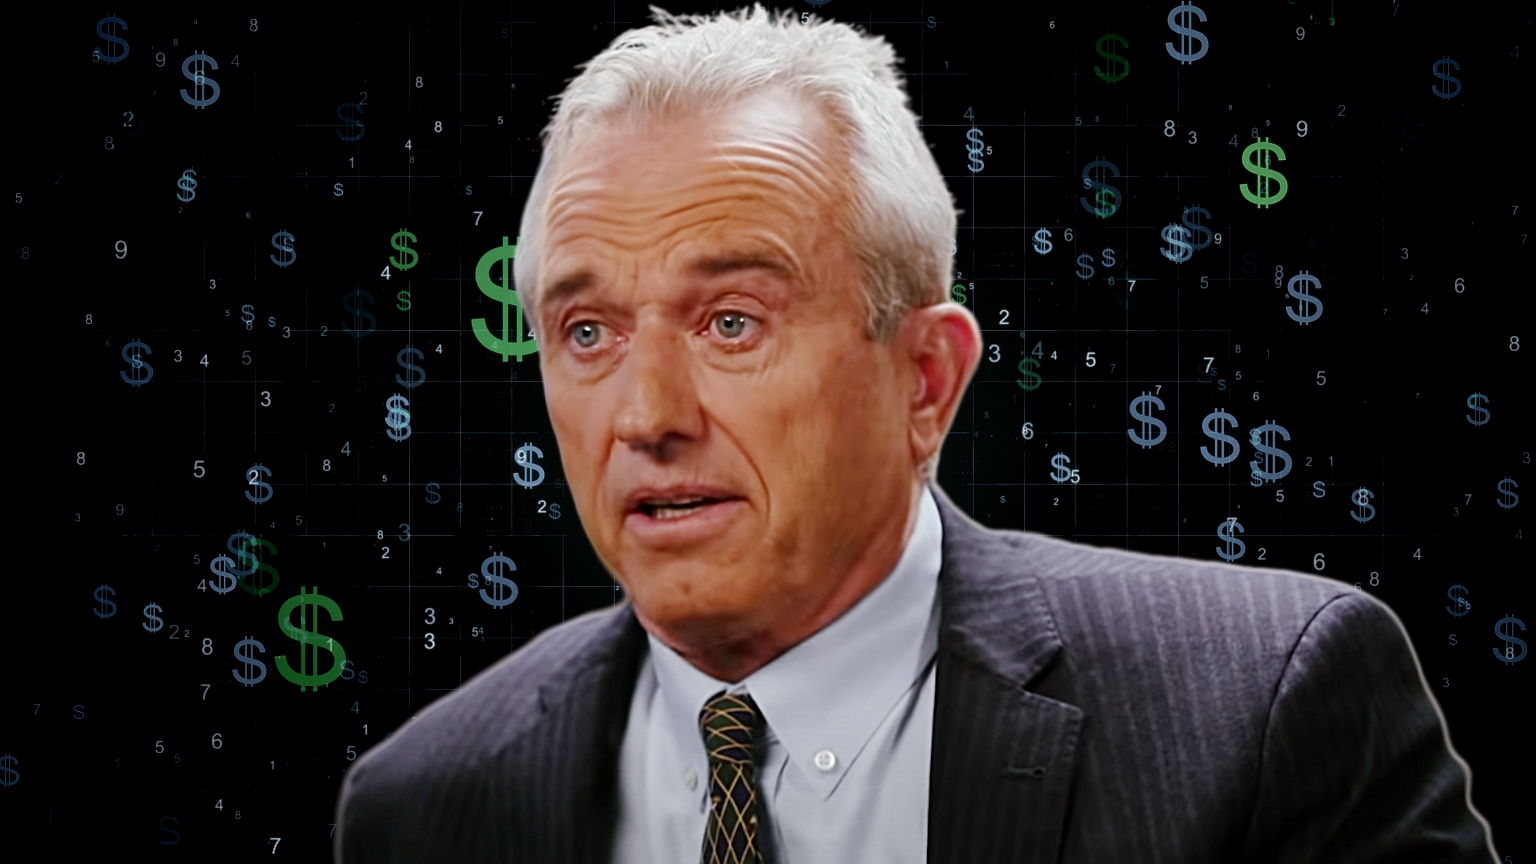 Robert F. Kennedy Jr: “CBDCs are the ultimate mechanisms for social surveillance and control”